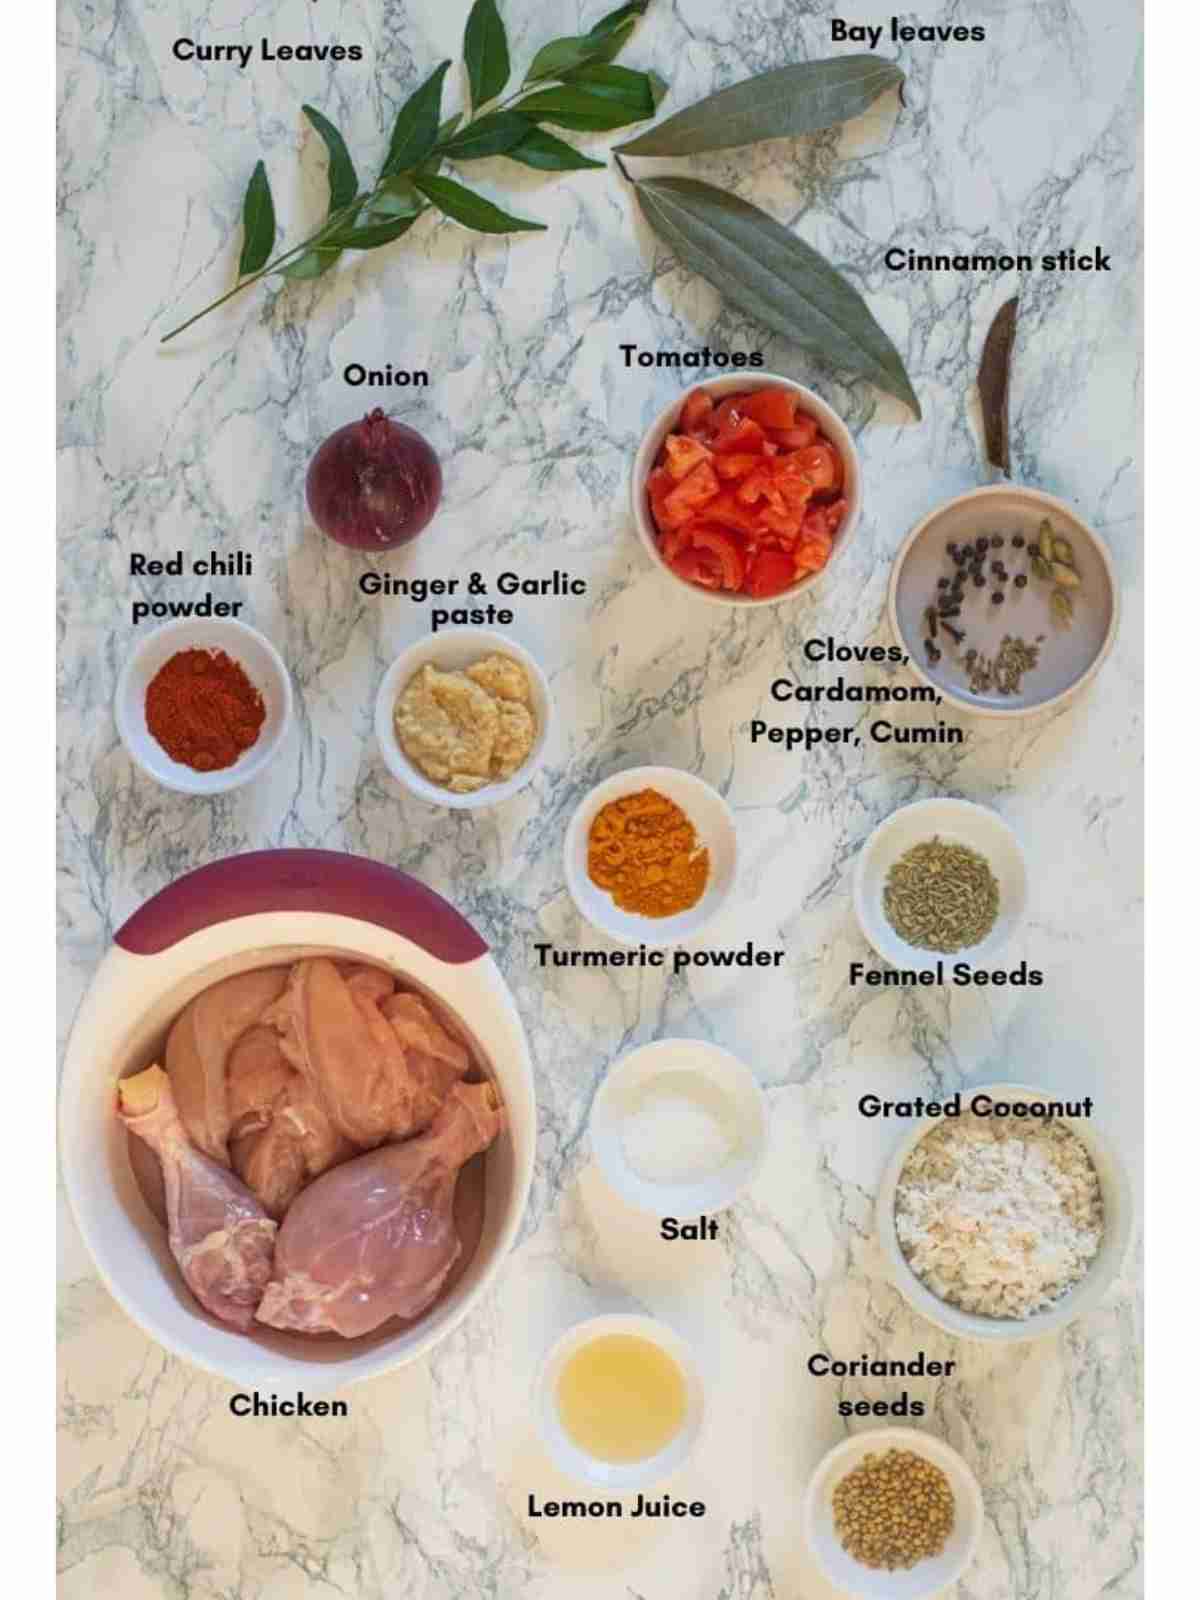 A list of ingredients used to make chettinad chicken curry